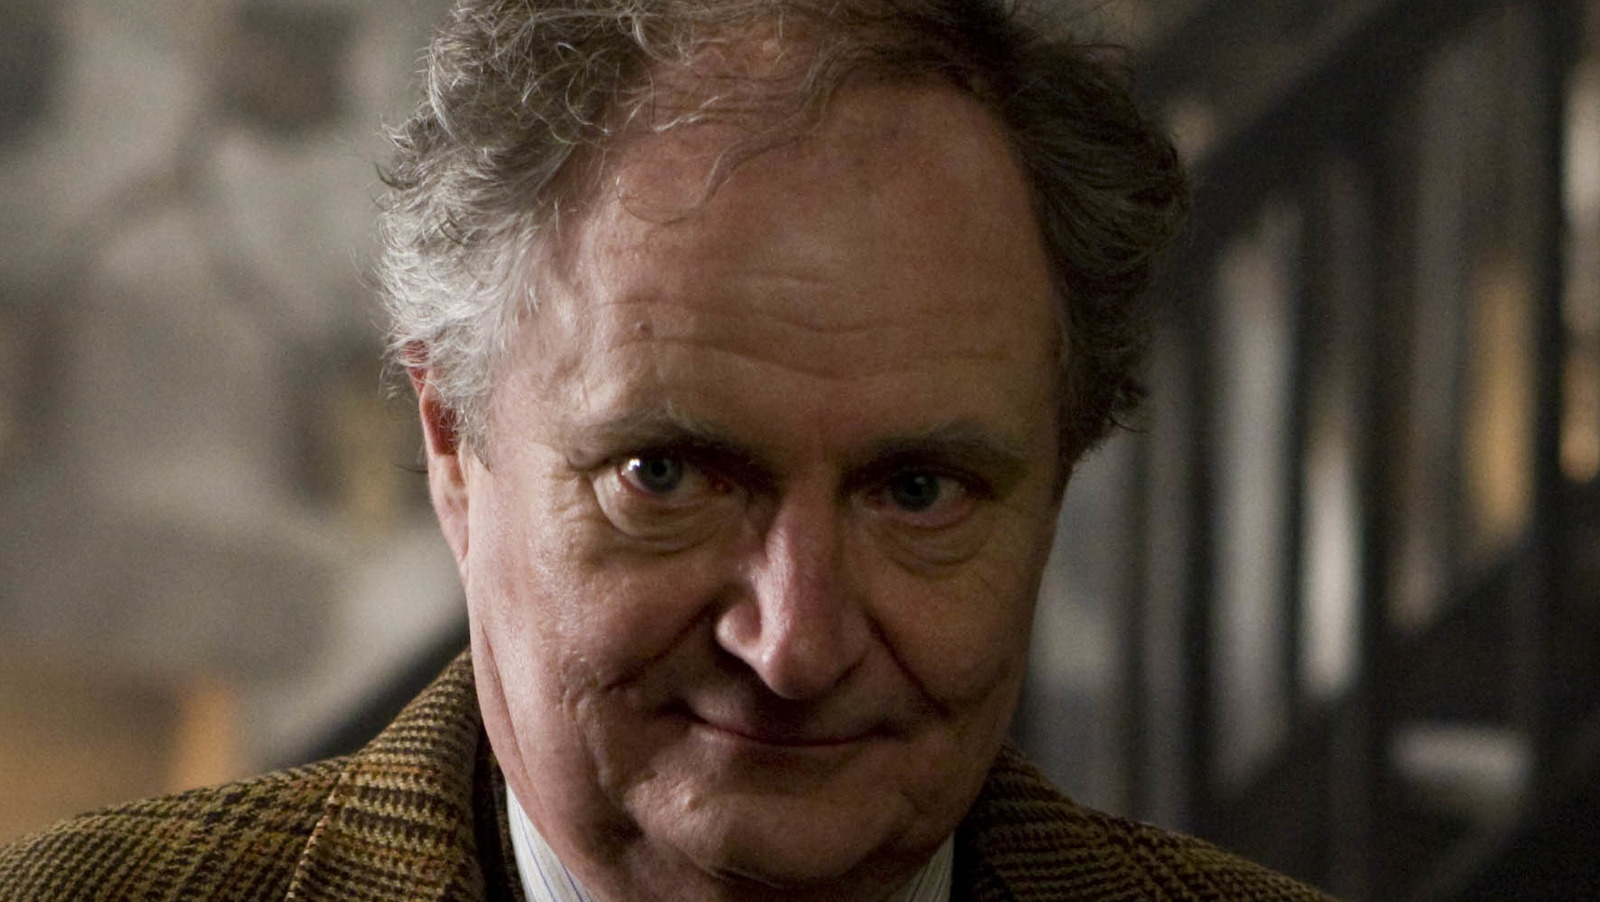 Who played Horace Slughorn in the Harry Potter series? 2